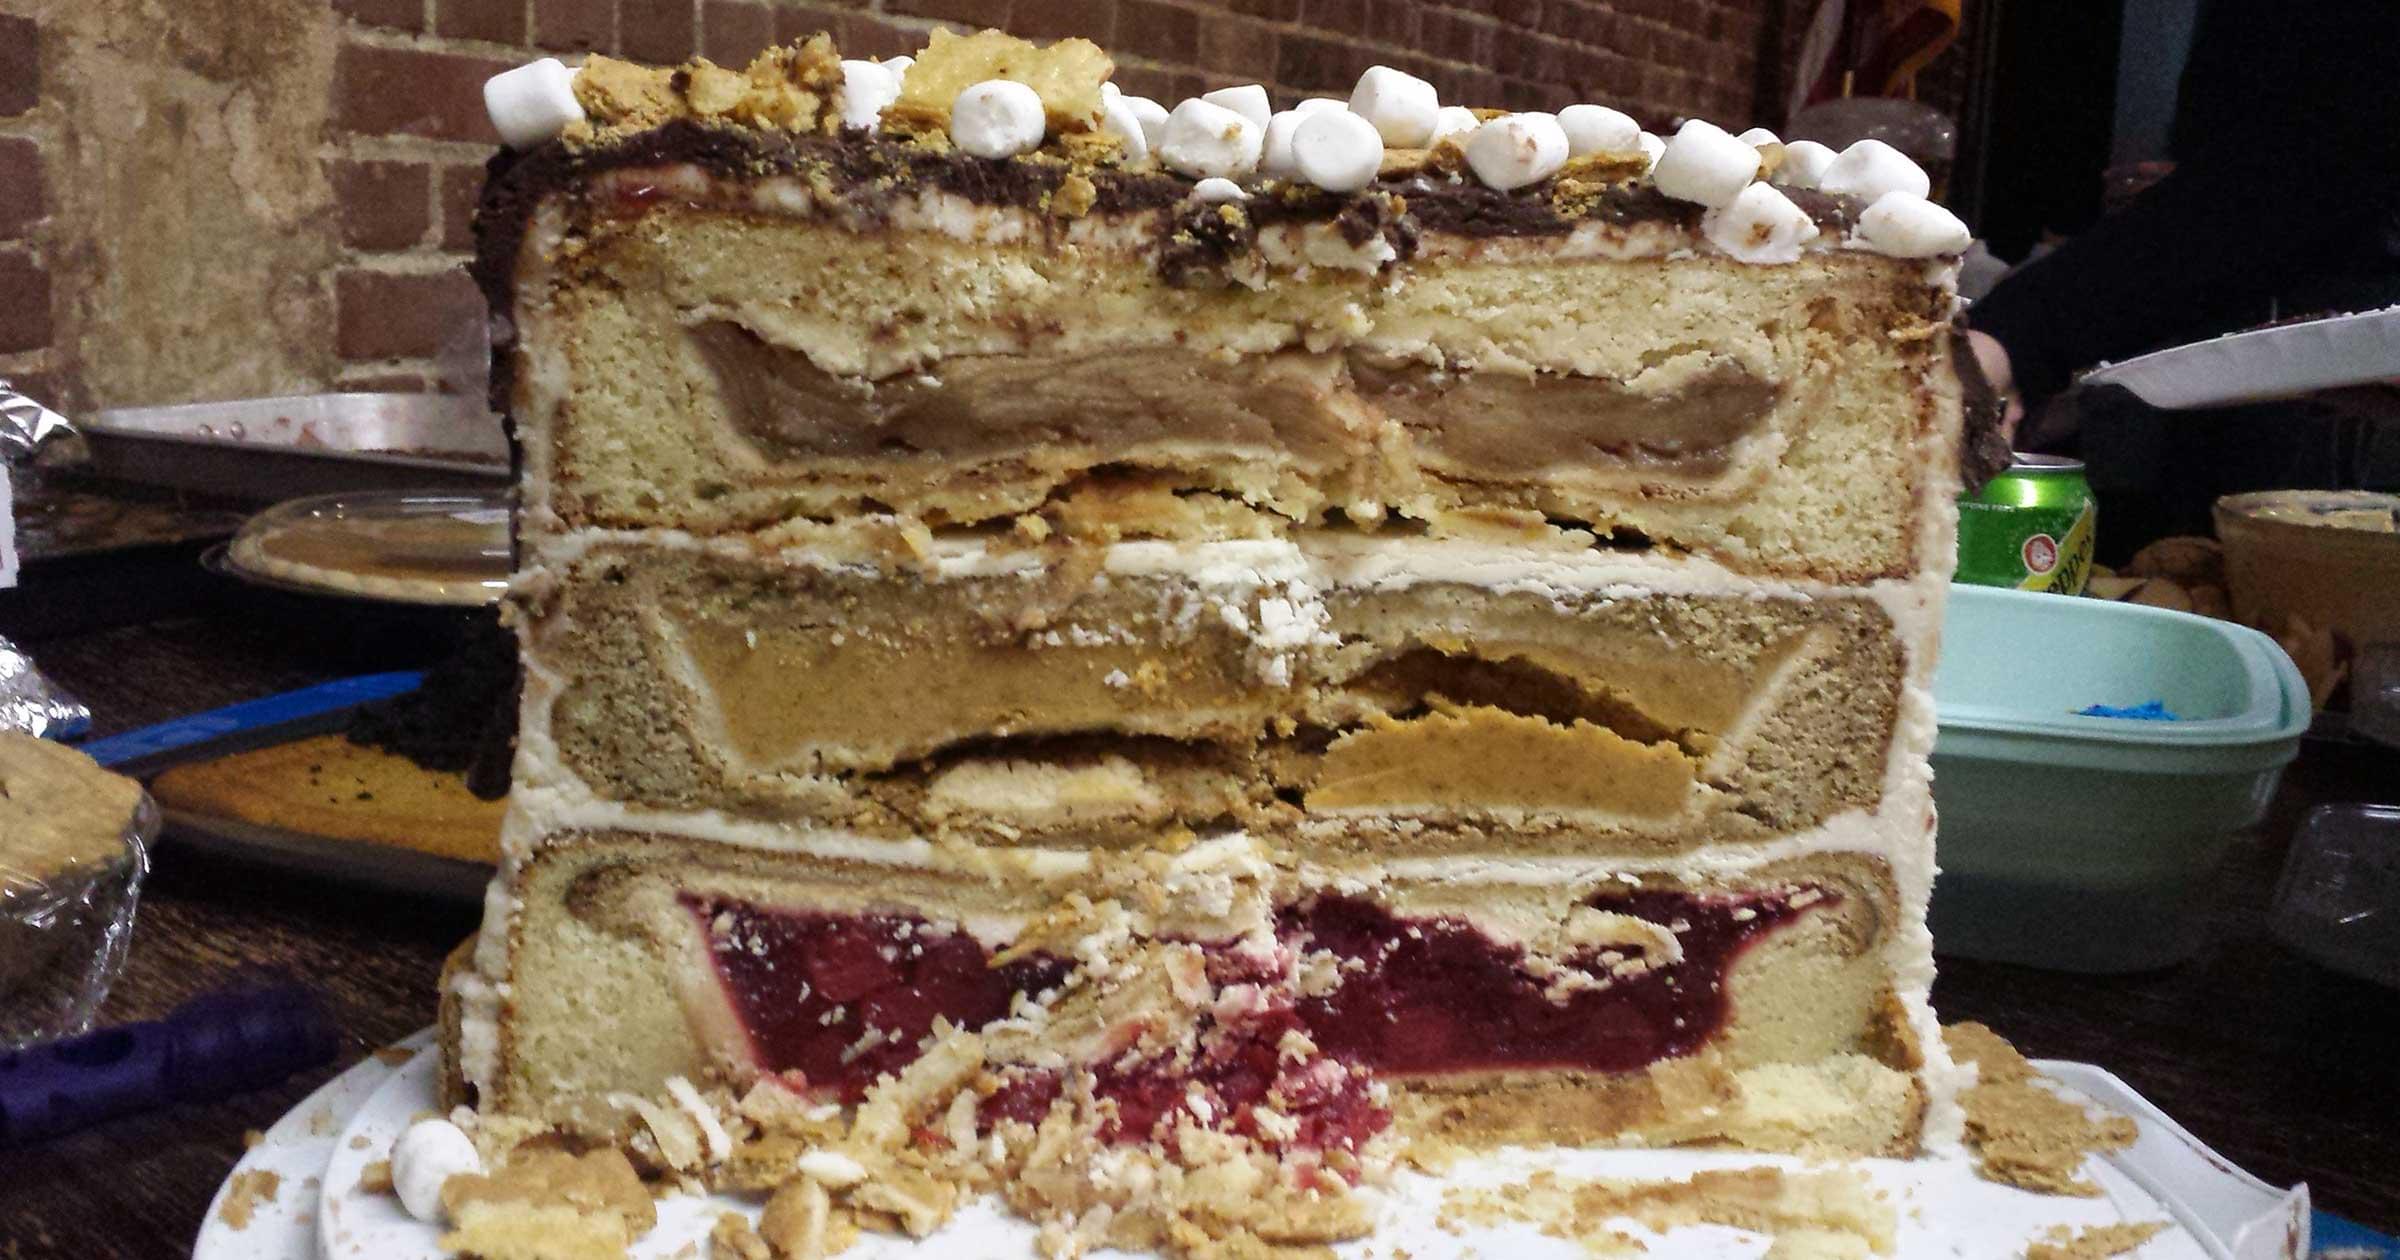 Cross-section of cake: 3 layers of different cake flavors, each with a different flavor pie in it.